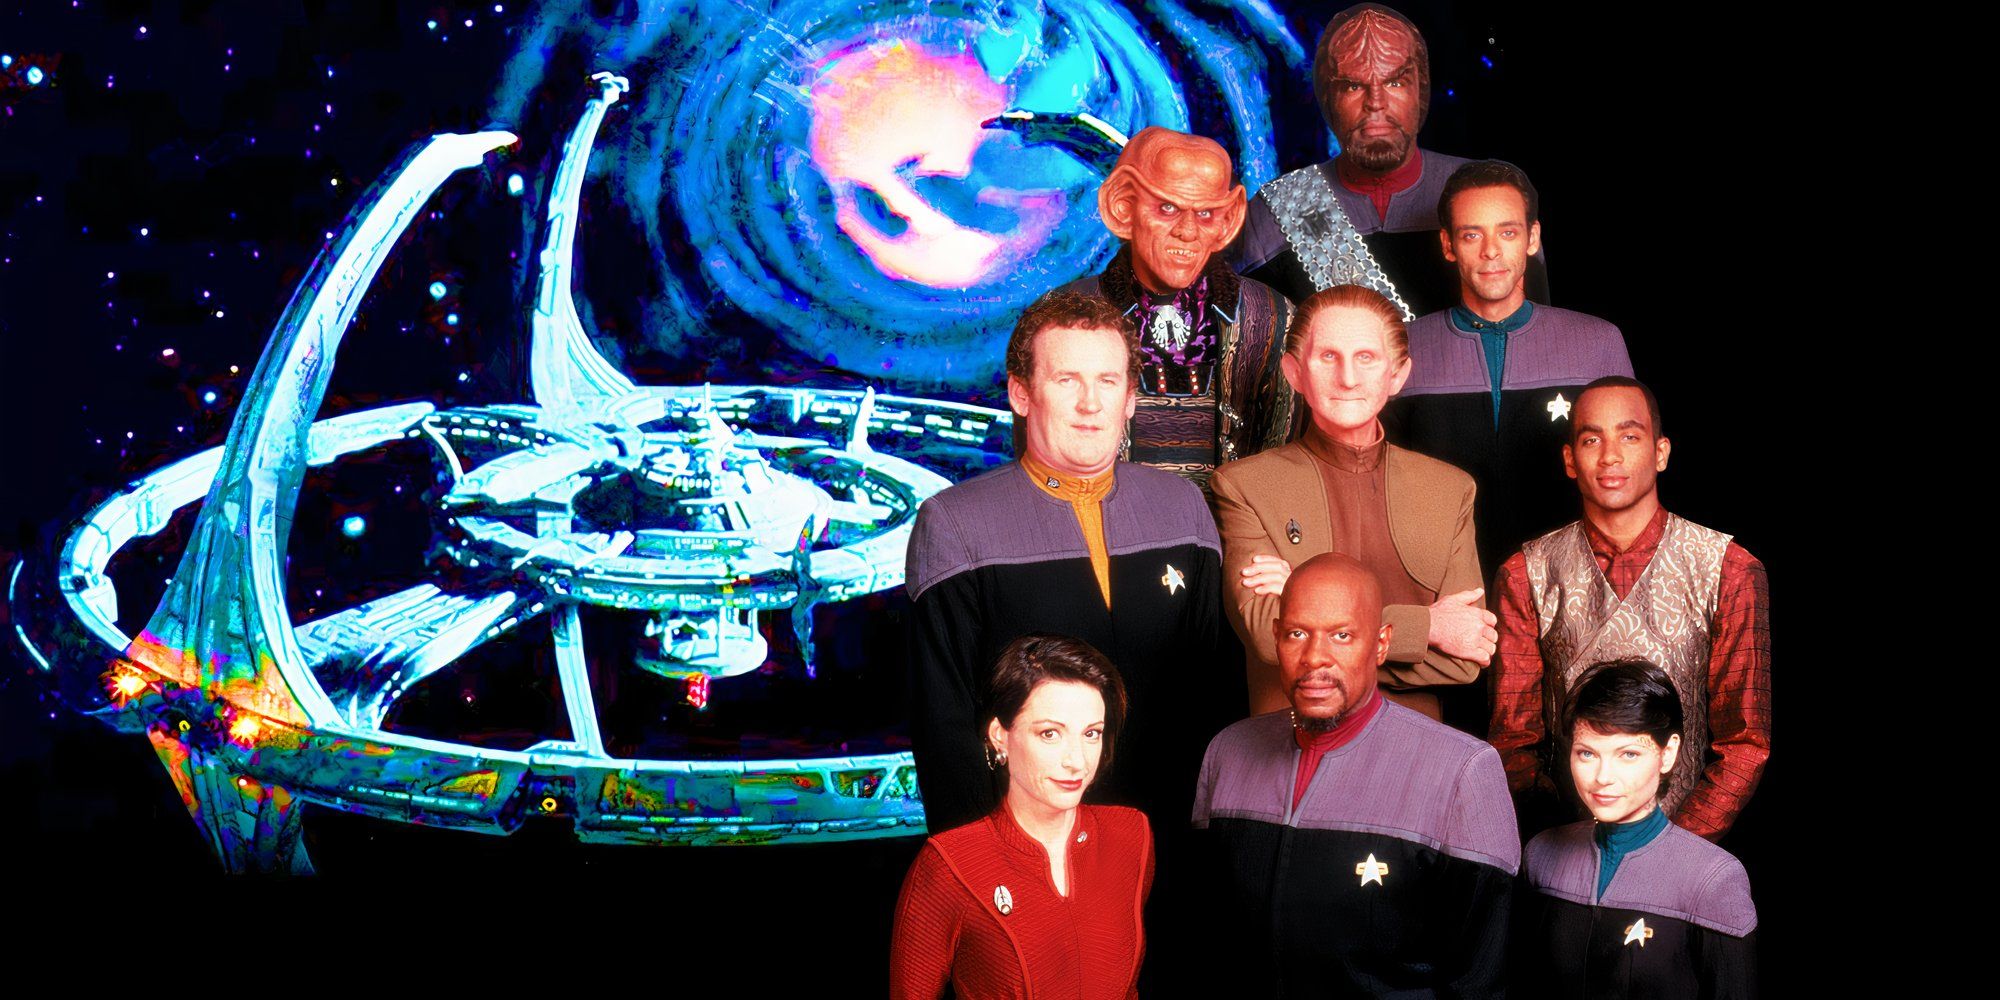 The Cast of Star Trek_ DS9, Deep Space Nine, and the wormhole